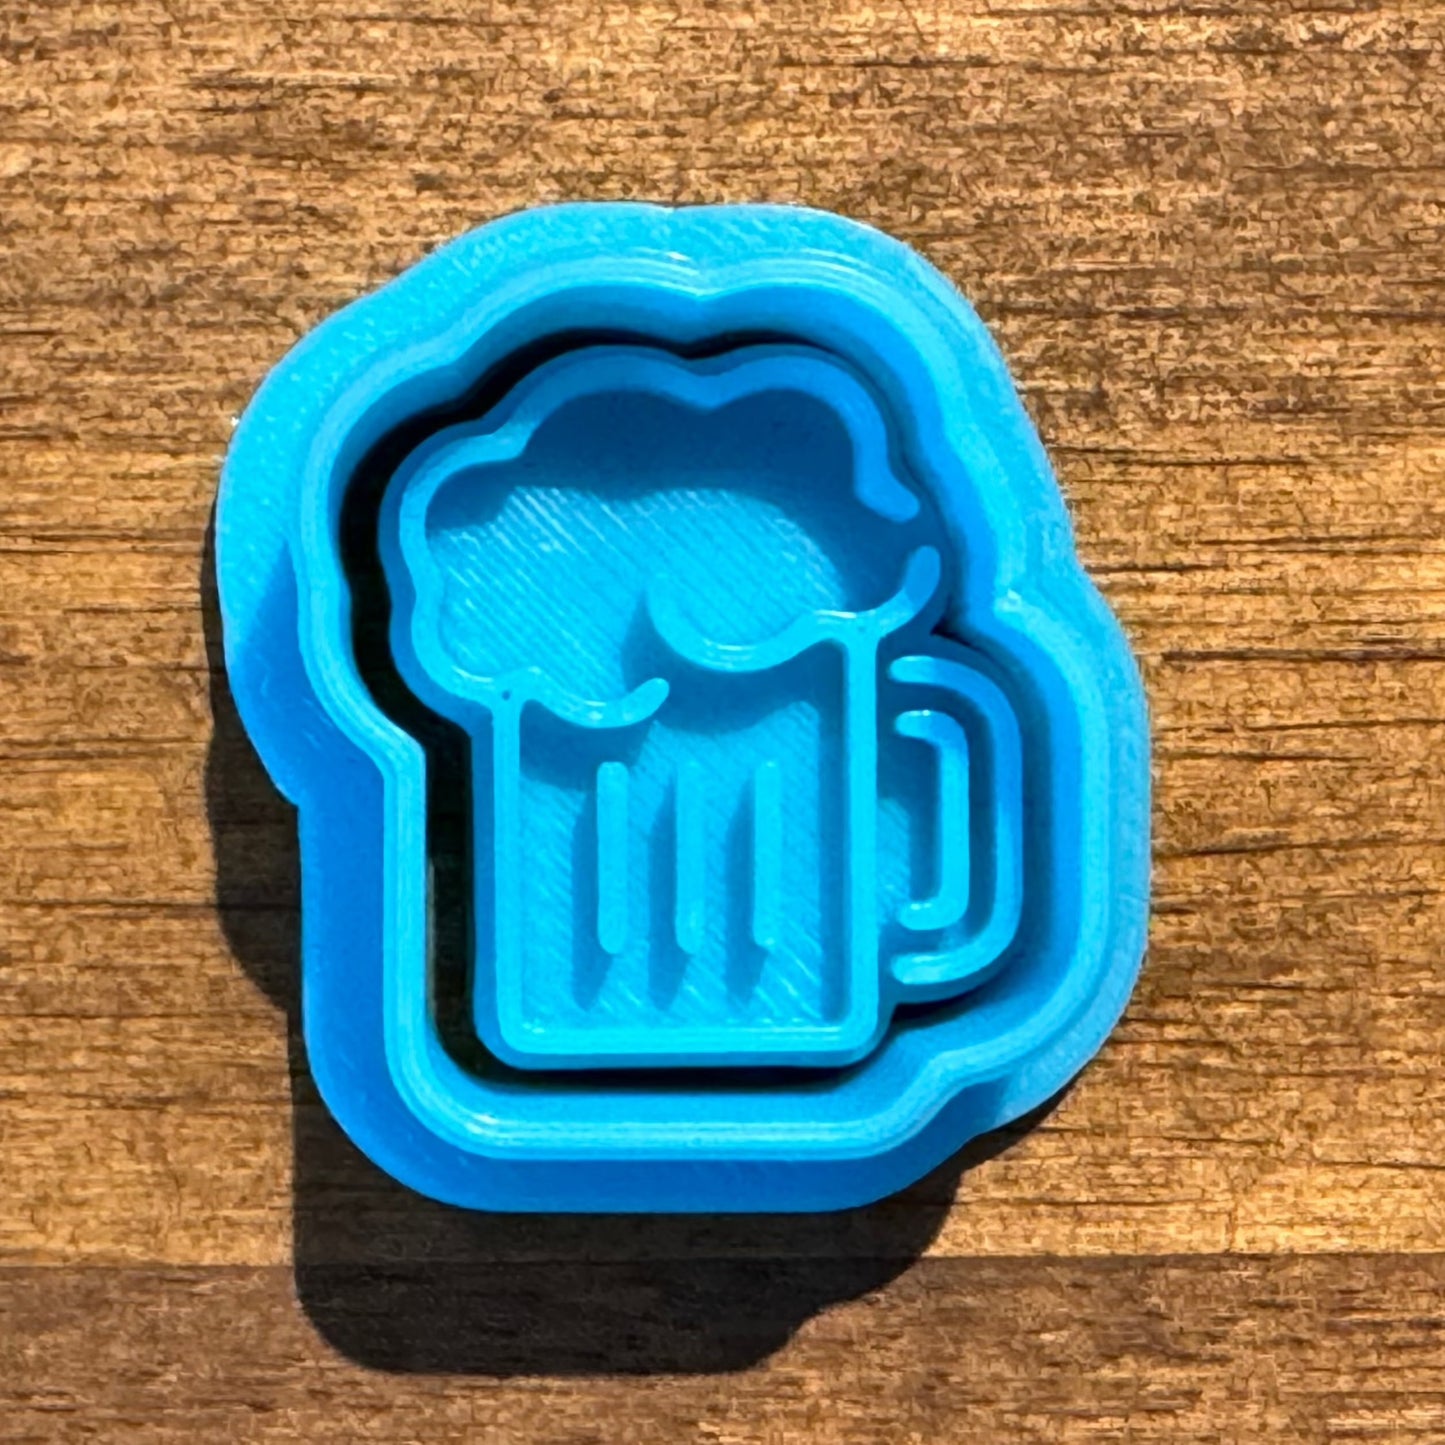 Mini Beer Stein Cookie Cutter and Embosser 2.5cm x 2.3cm